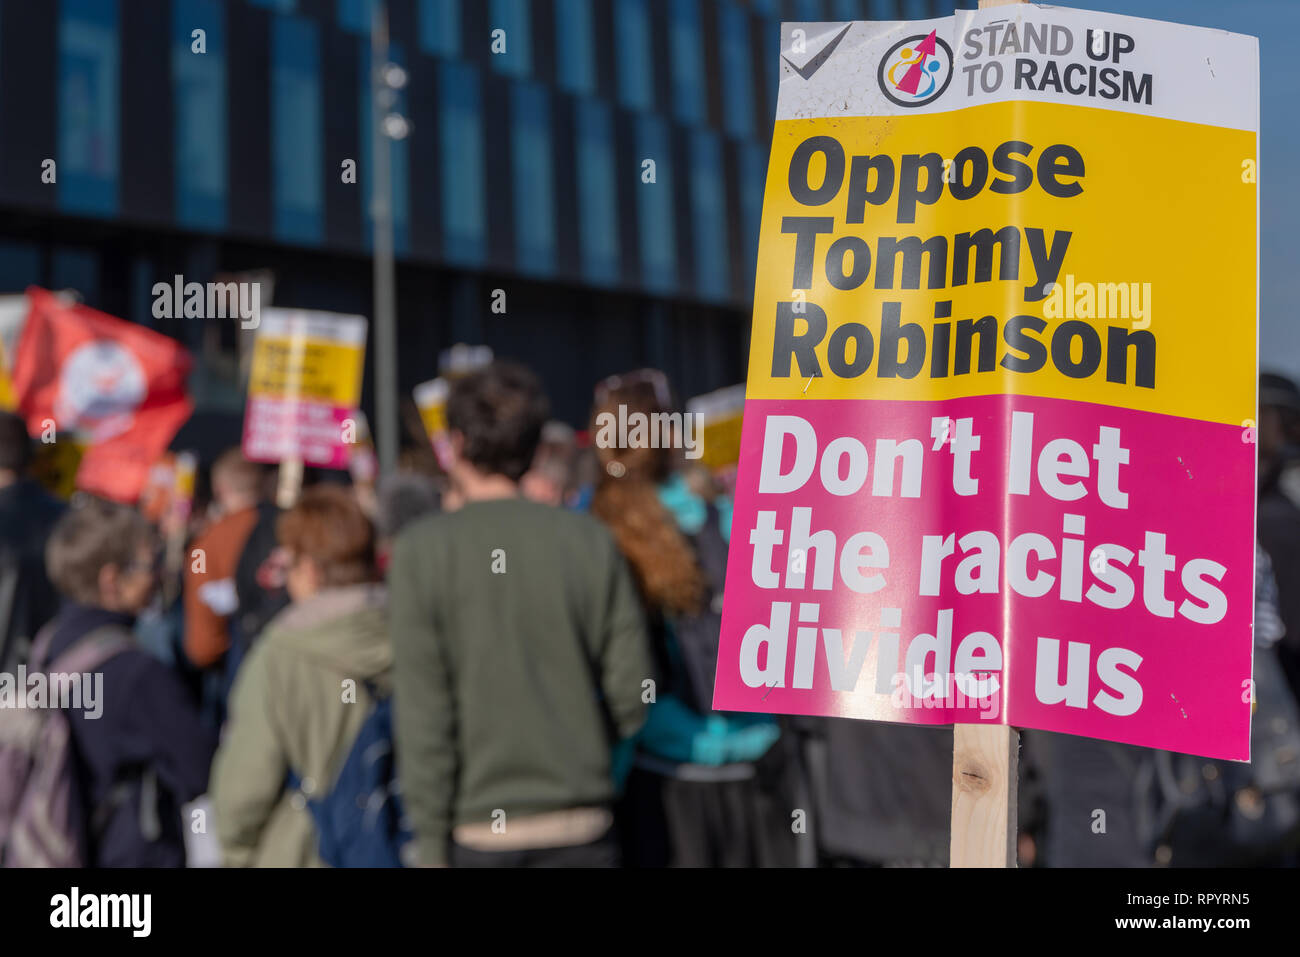 Salford, Greater Manchester, UK. 23rd February, 2019. Anti-fascist protestors are holding a counter rally at MediaCity in Salford against plans by the former leader of the English Defence League to demonstrate against the BBC. Credit: Alvaro Velazquez Gardeta/Alamy Live News Stock Photo